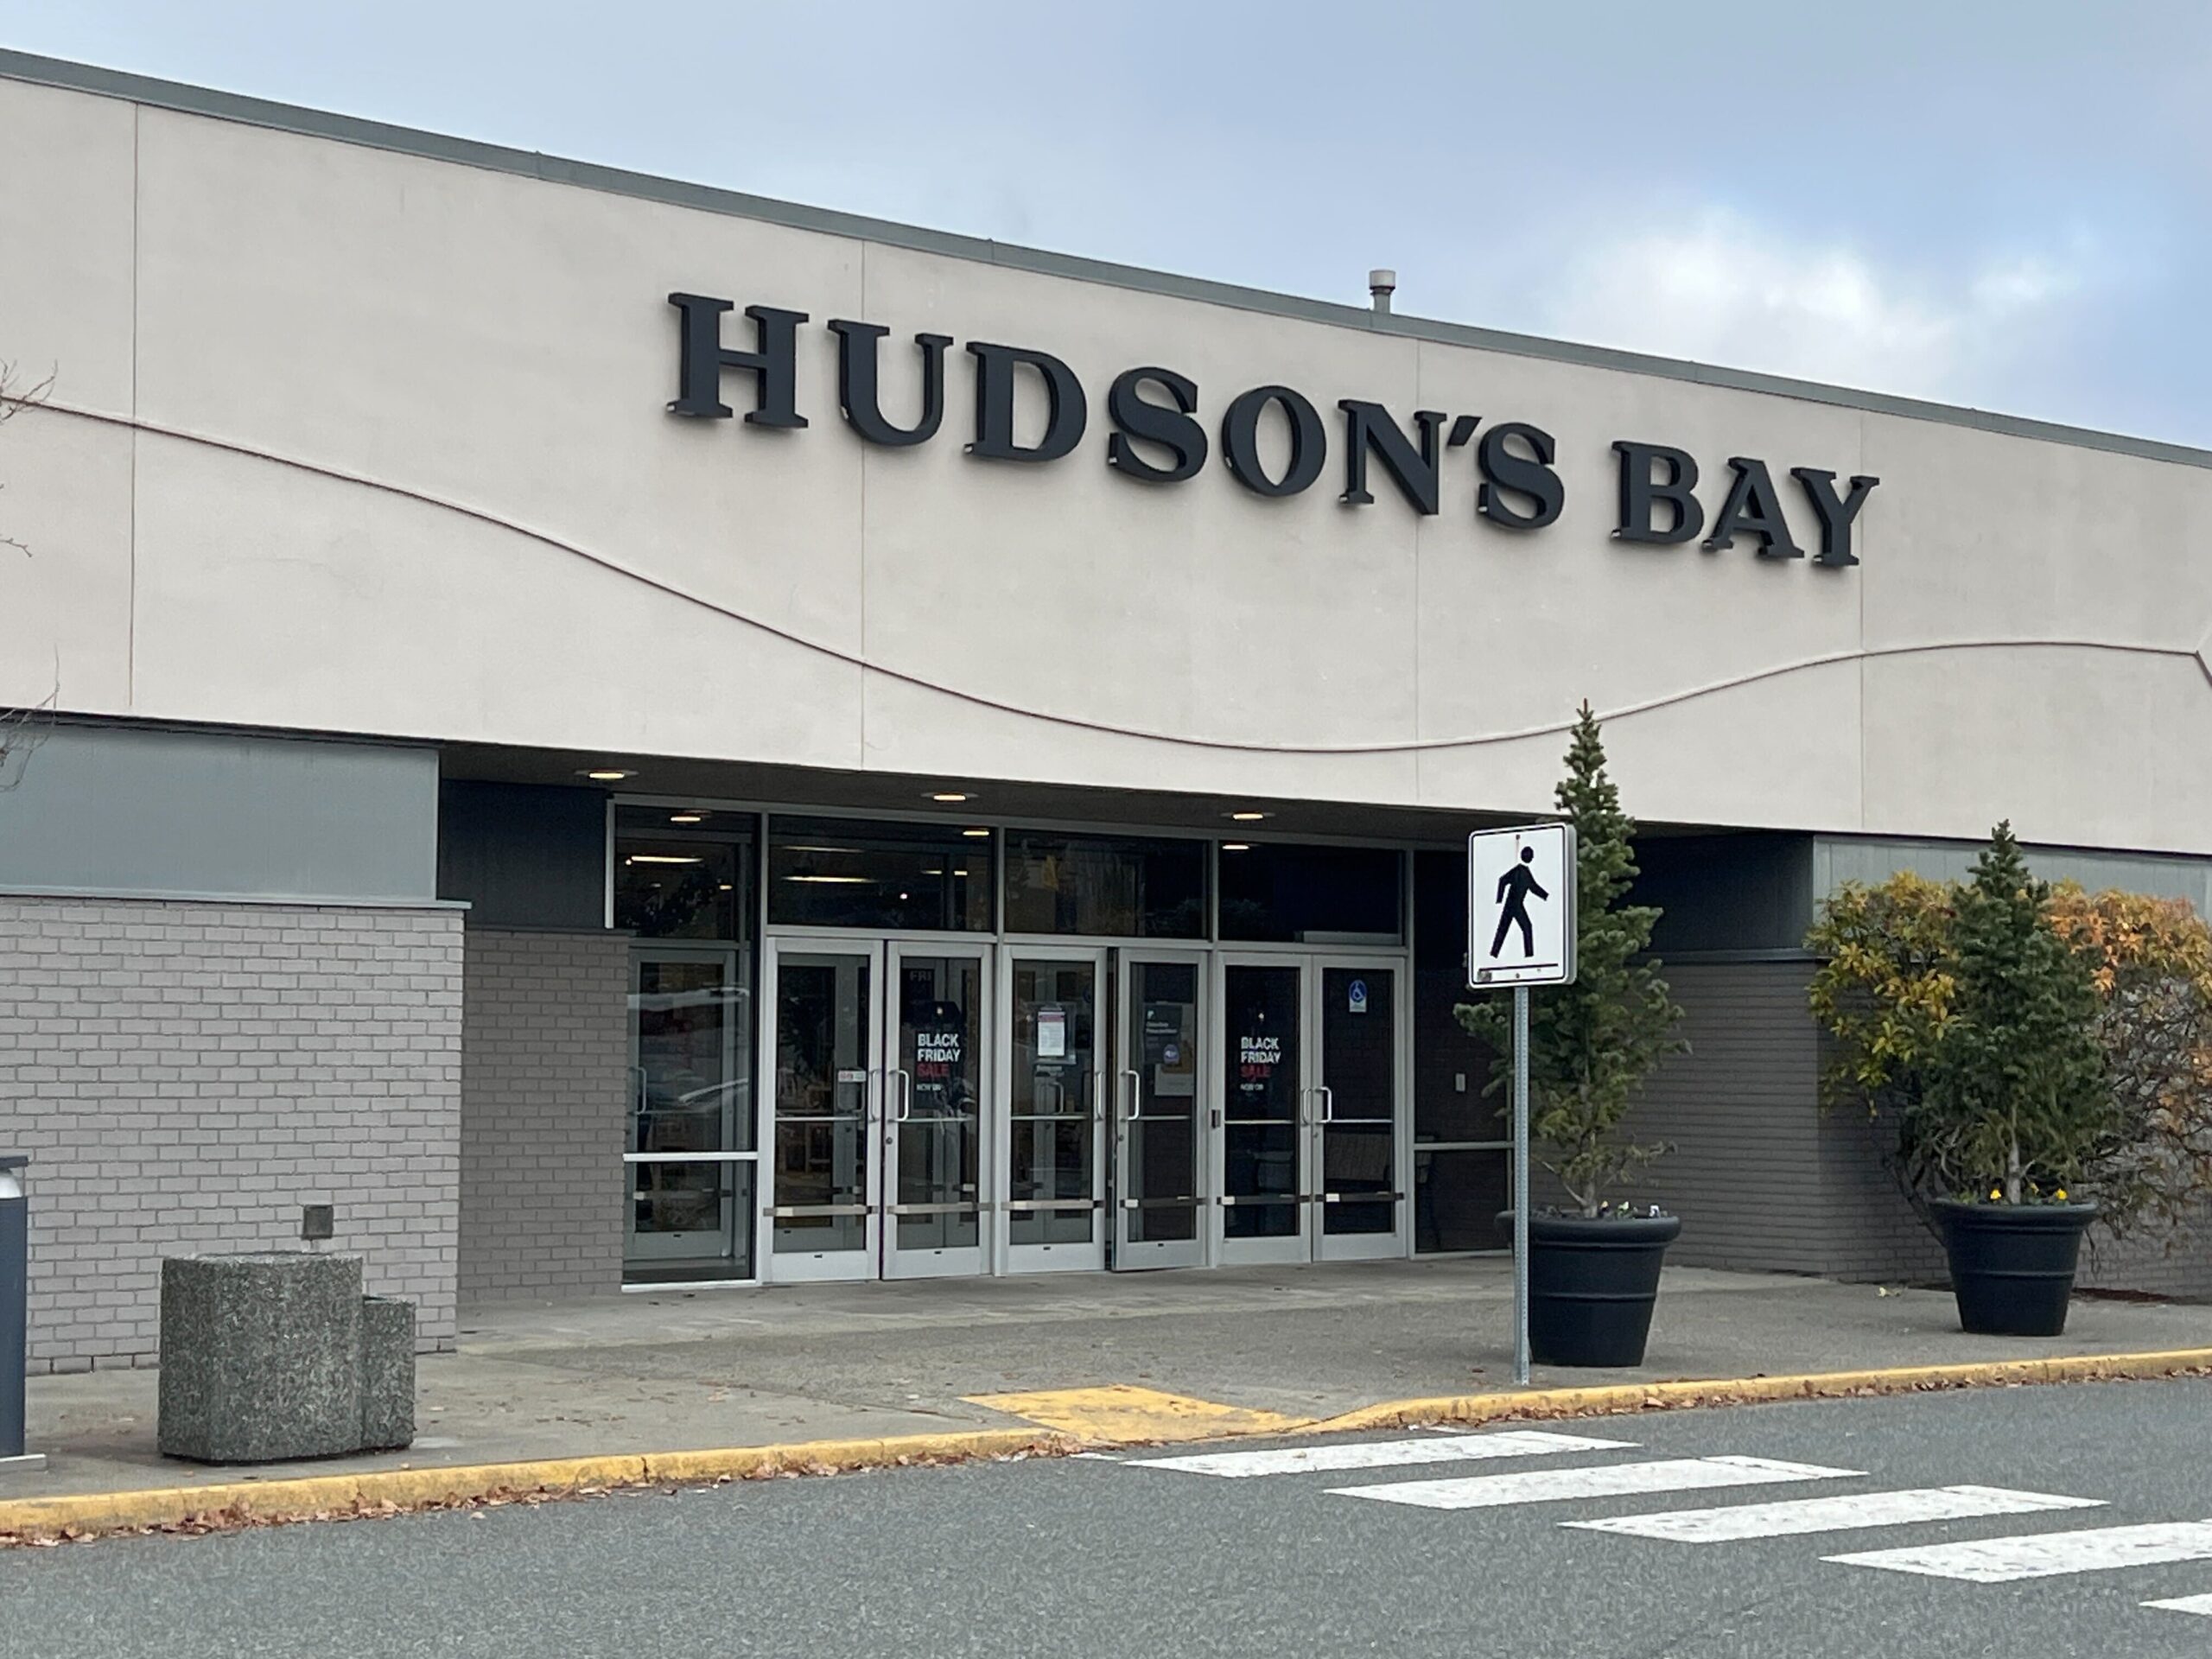 The Bay (@hudsonsbay) • Instagram photos and videos